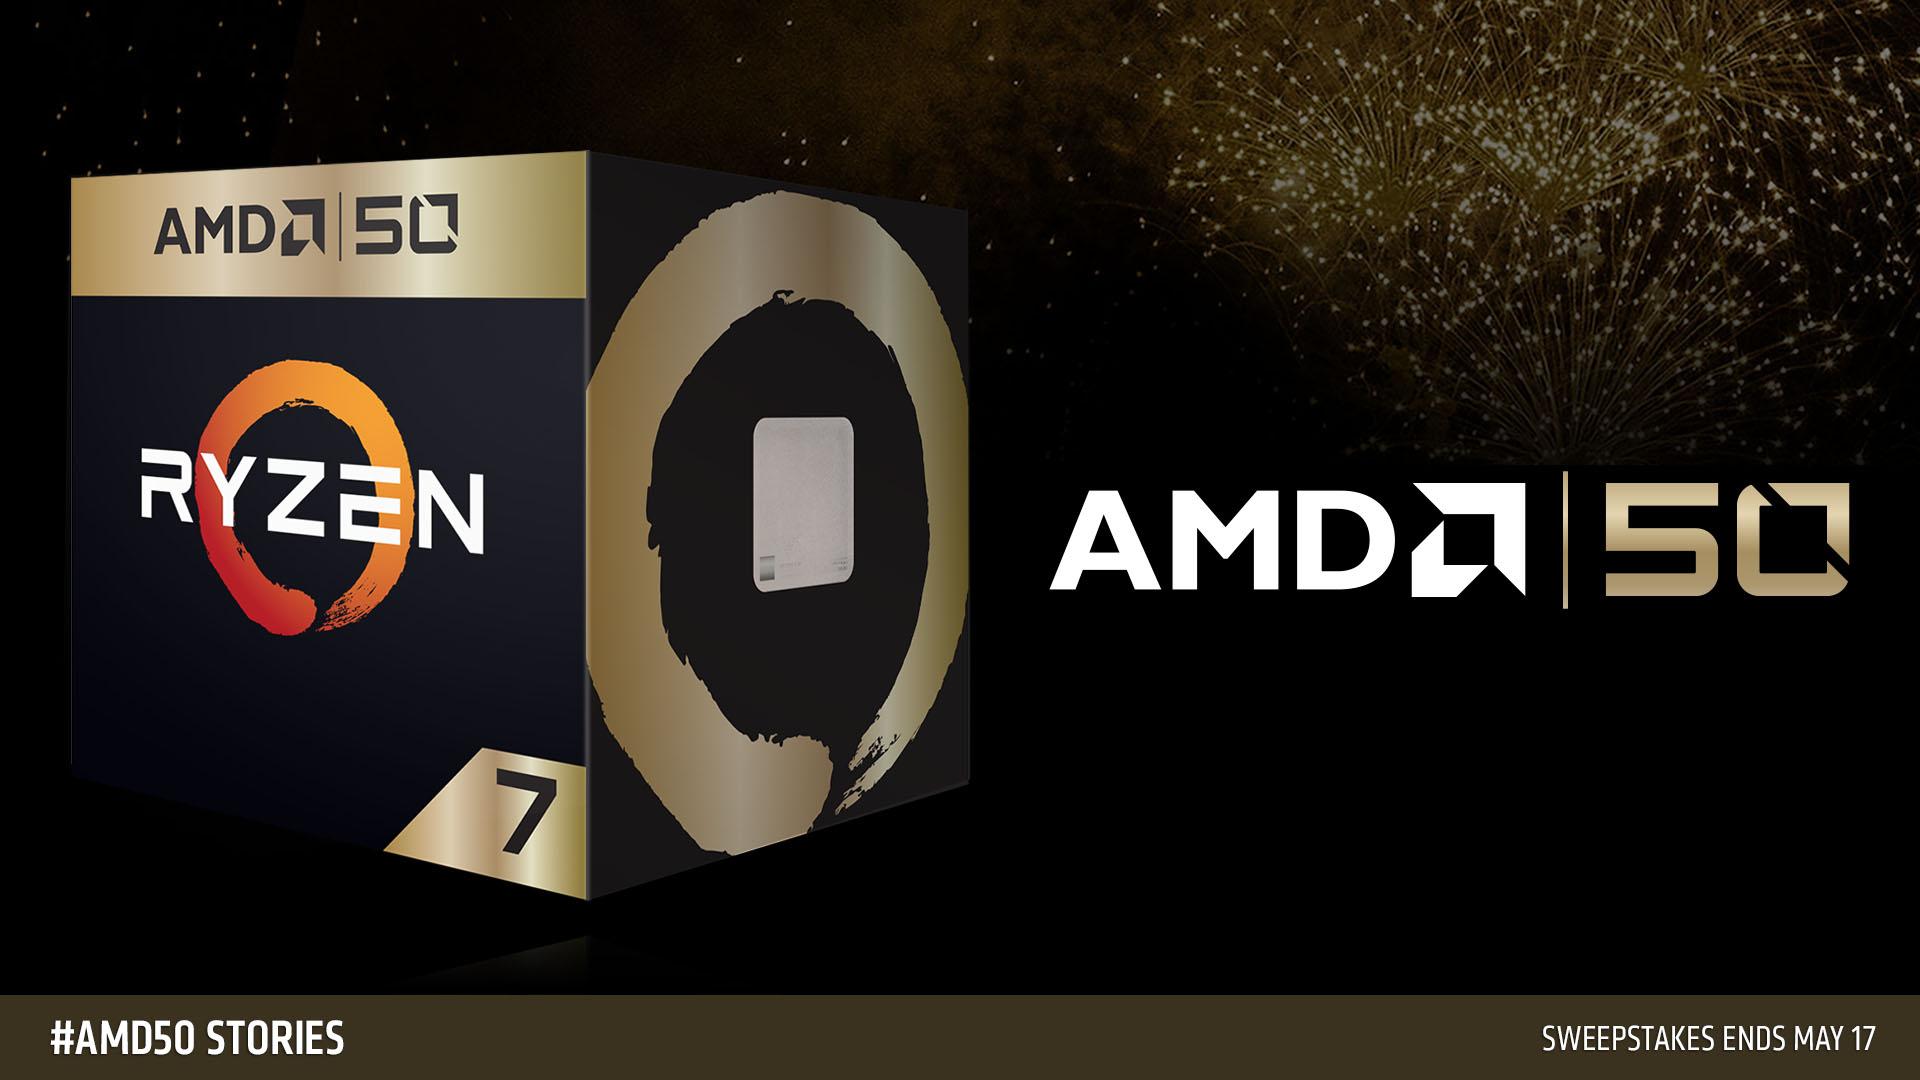 Media asset in full size related to 3dfxzone.it news item entitled as follows: AMD lancia ufficialmente Ryzen 7 2700X Gold Edition e Radeon VII  Gold Edition | Image Name: news29532_AMD-50th-anniversary-launch-gold-edition_1.jpg